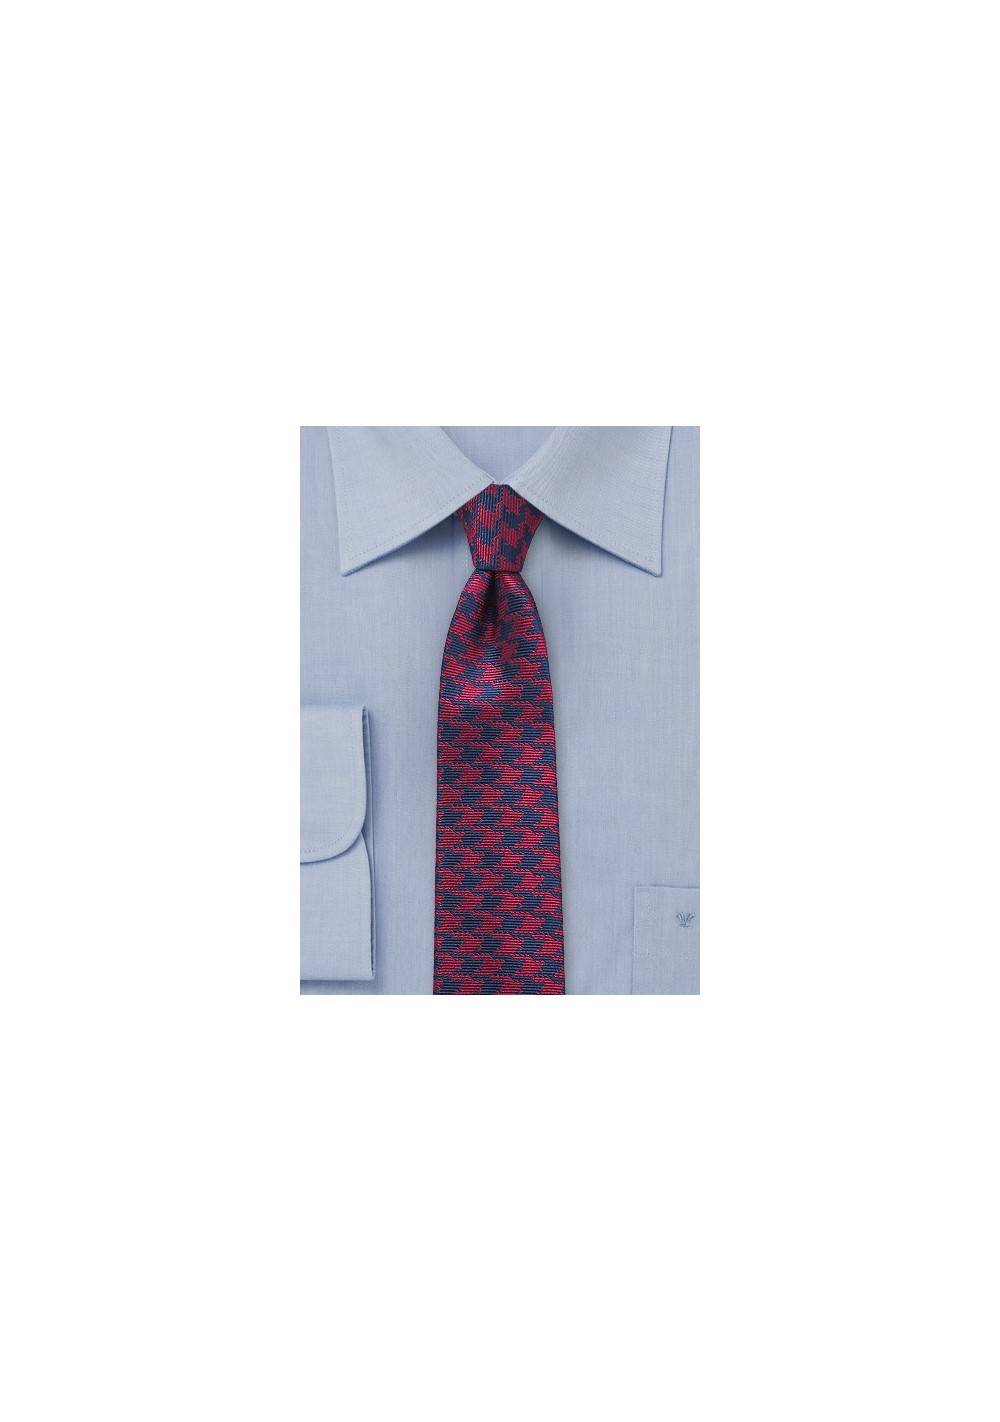 Skinny Houndstooth Check Tie in Red and Navy